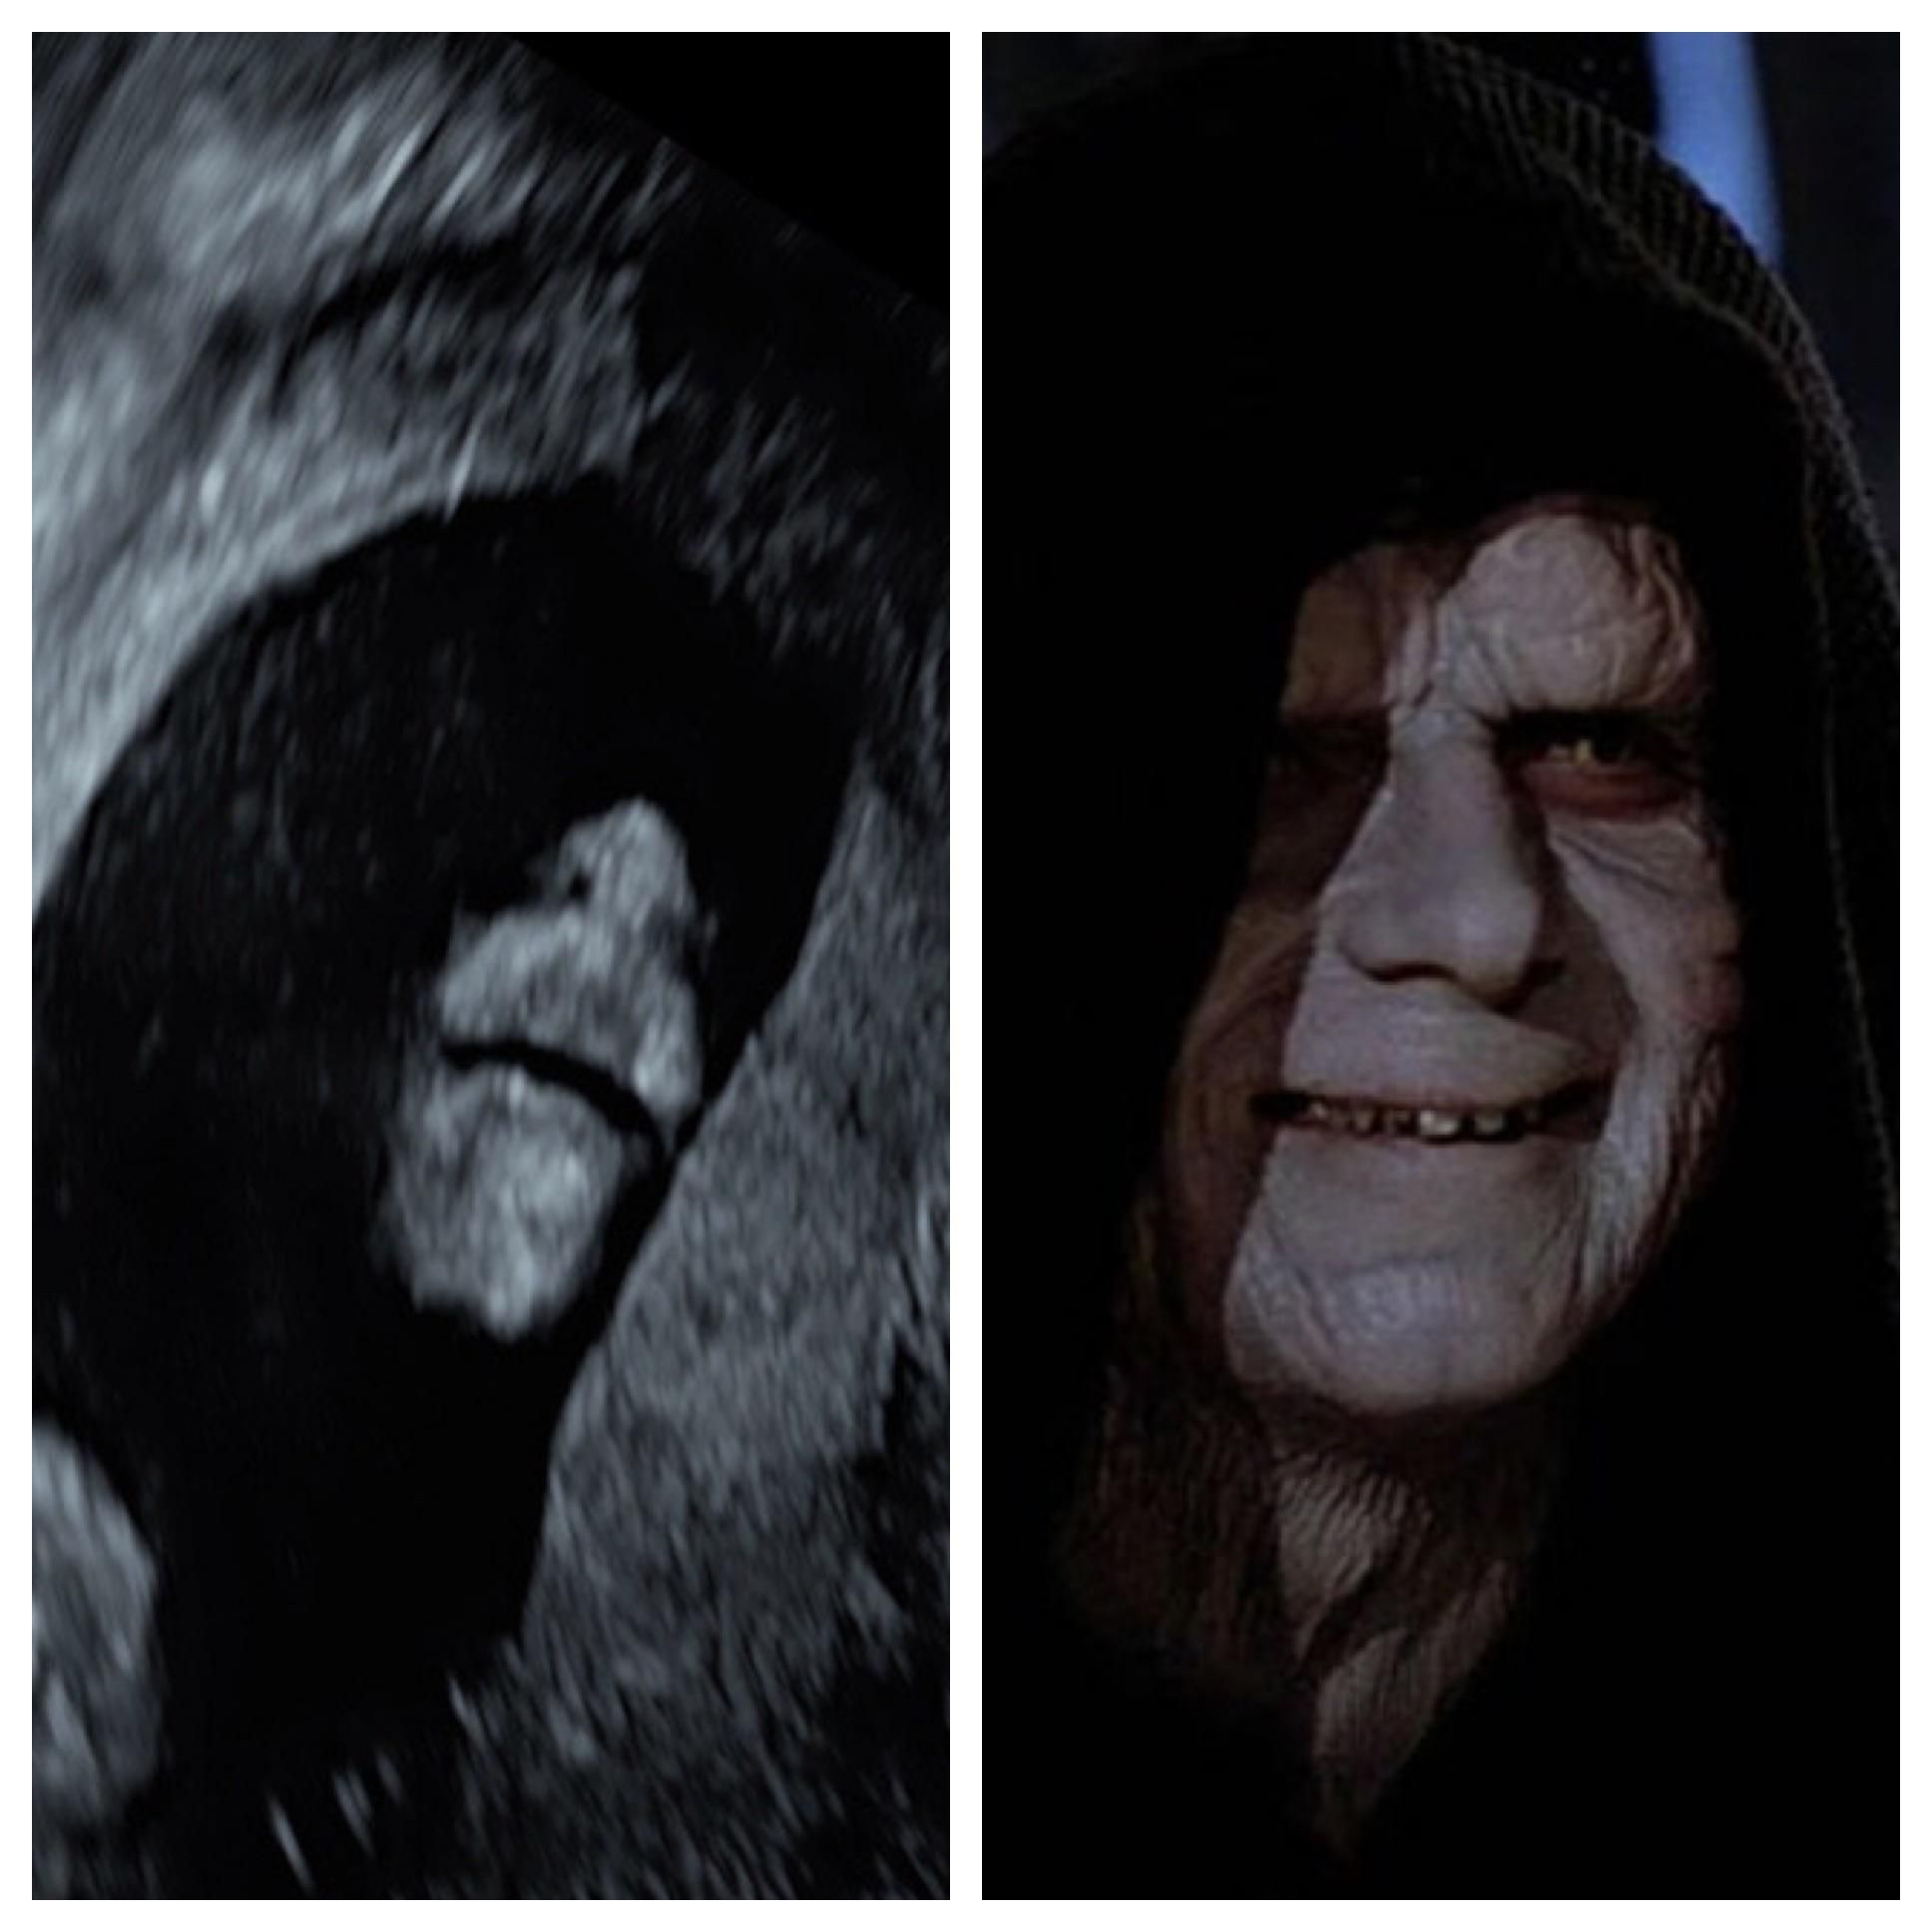 My baby’s ultrasound or Darth kidious